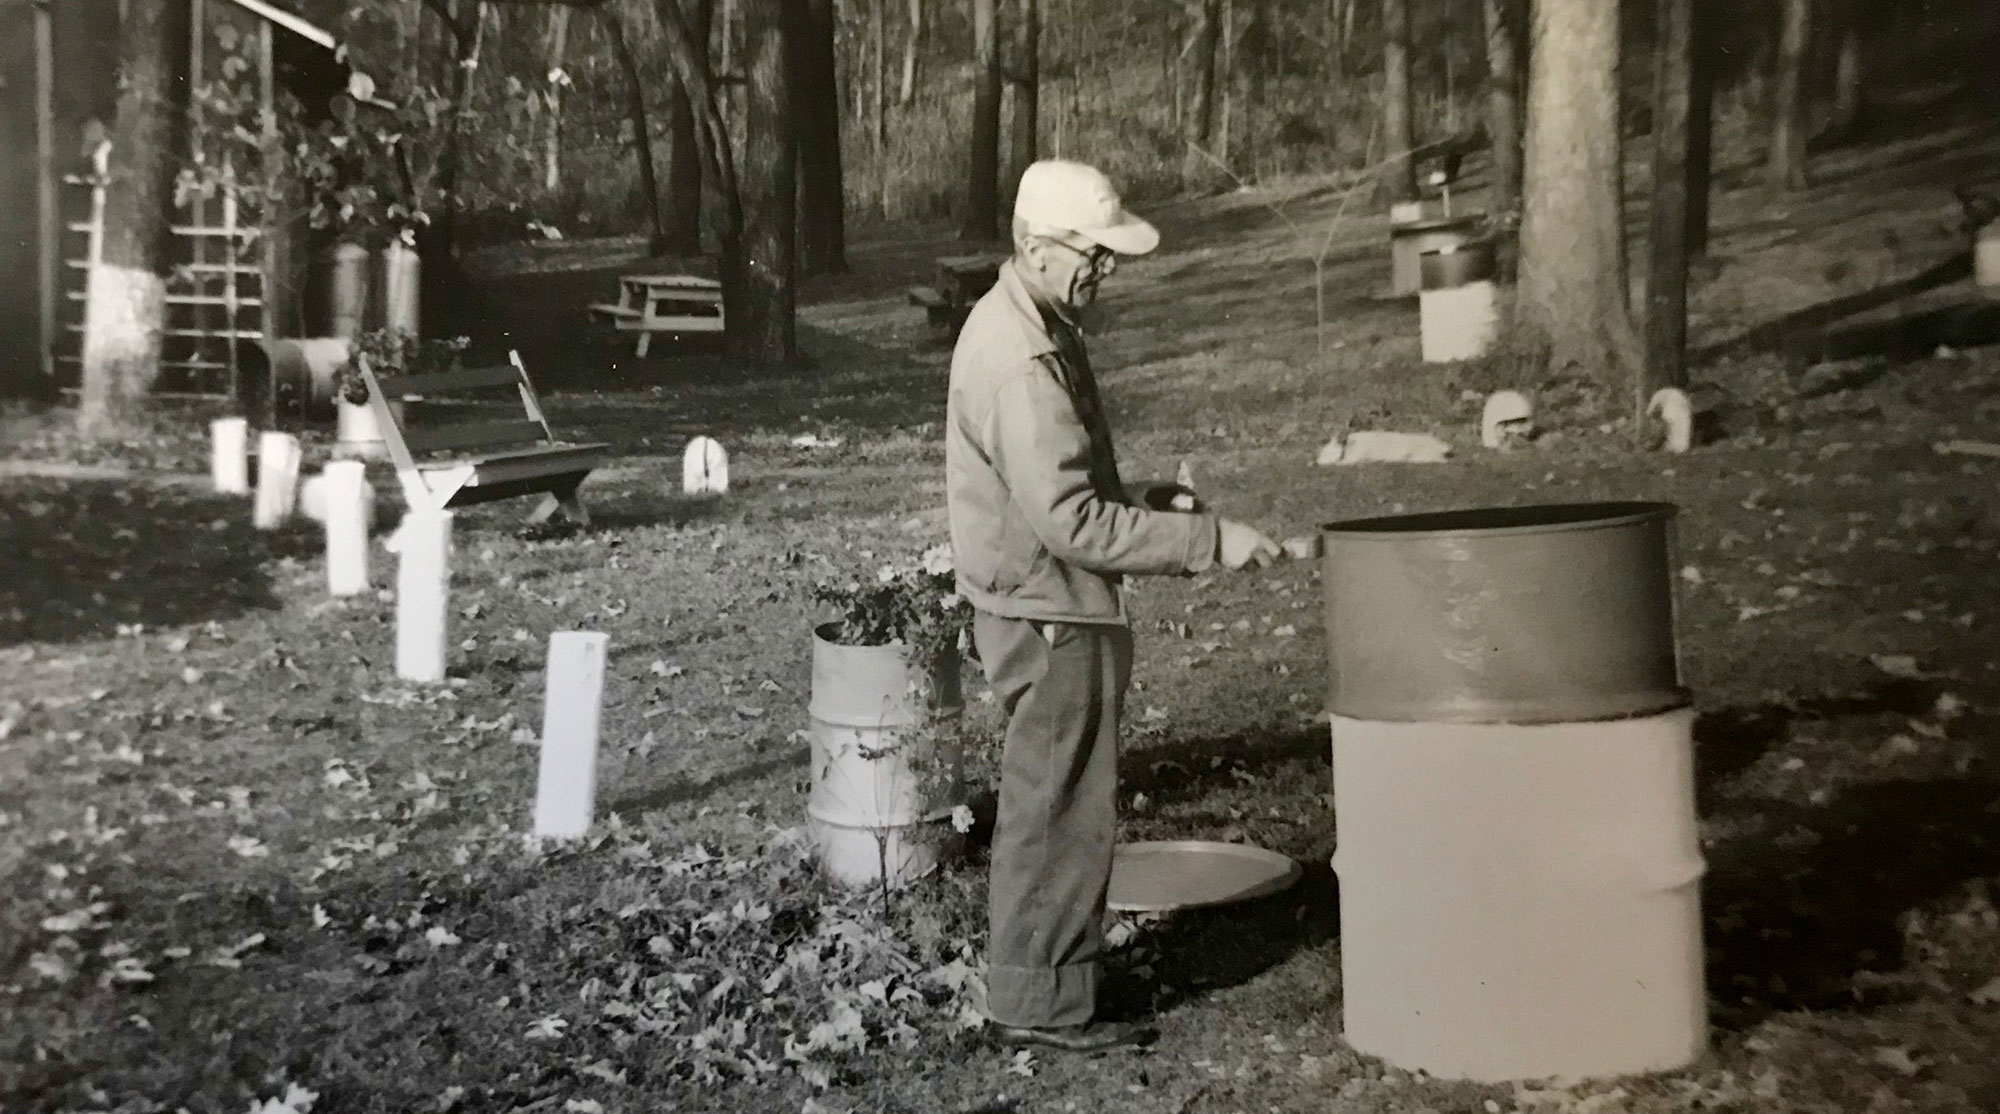 Arthur Sage painting an oil drum used as garbage receptacles in the preserve. 